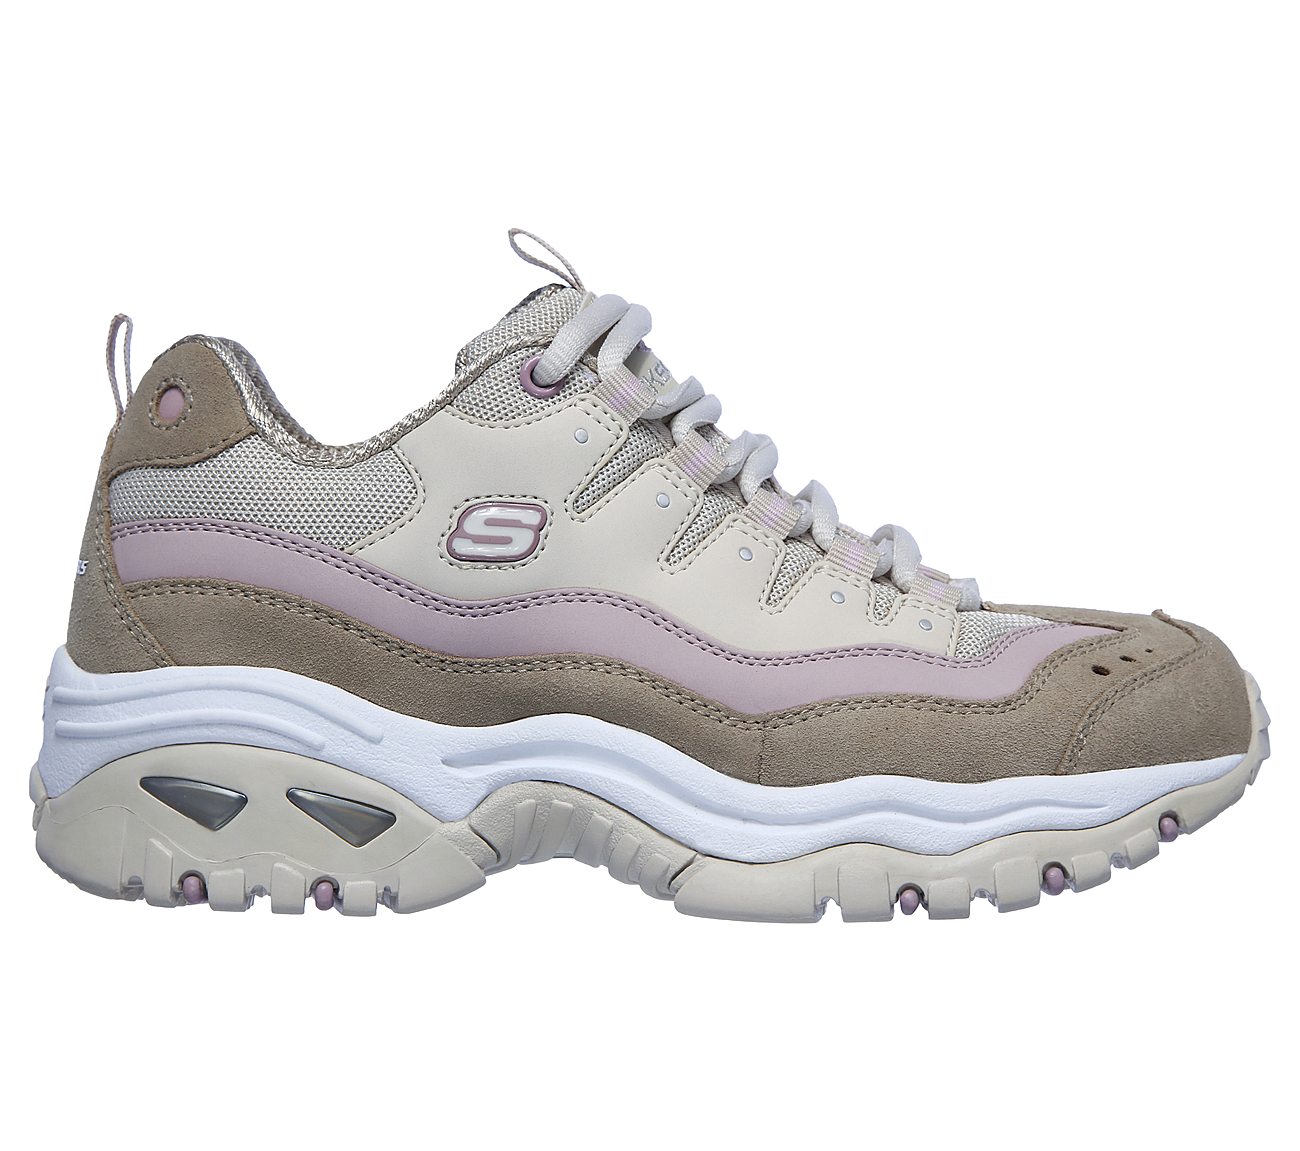 skechers most expensive shoes